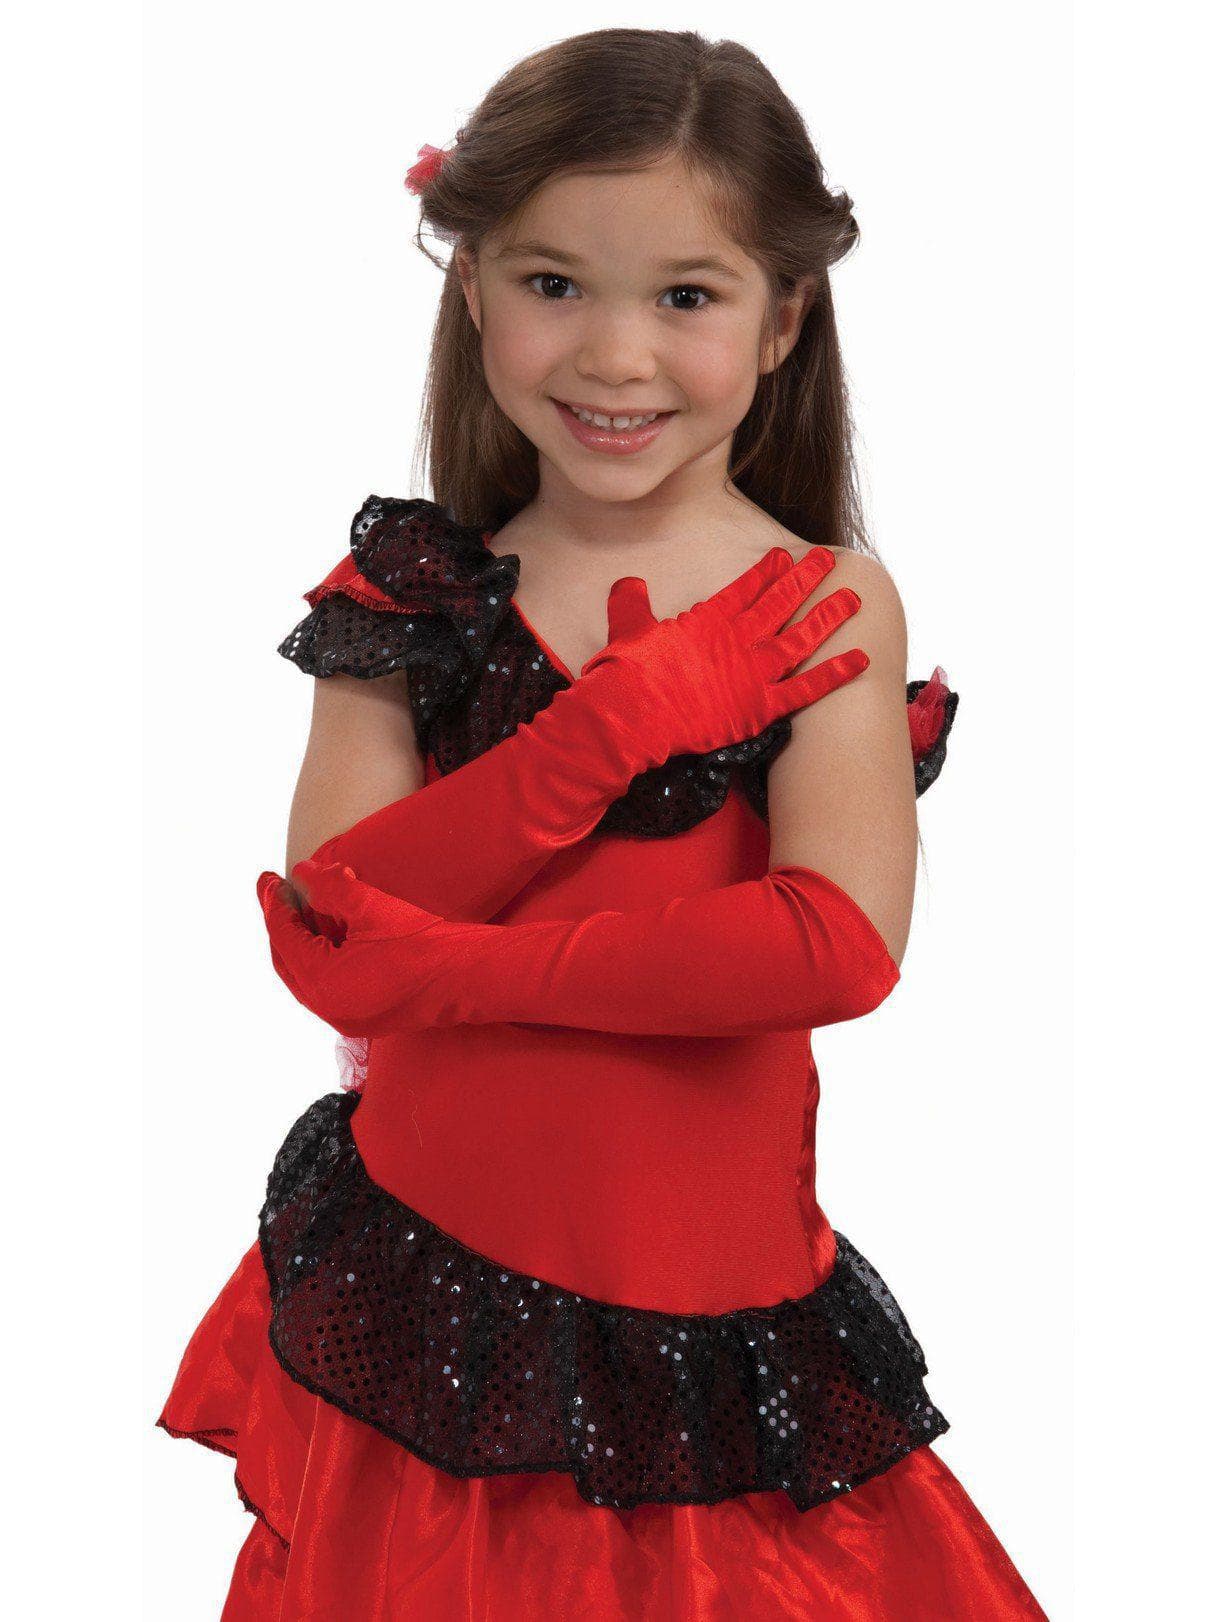 Kids' Red Elbow Length Gloves - costumes.com